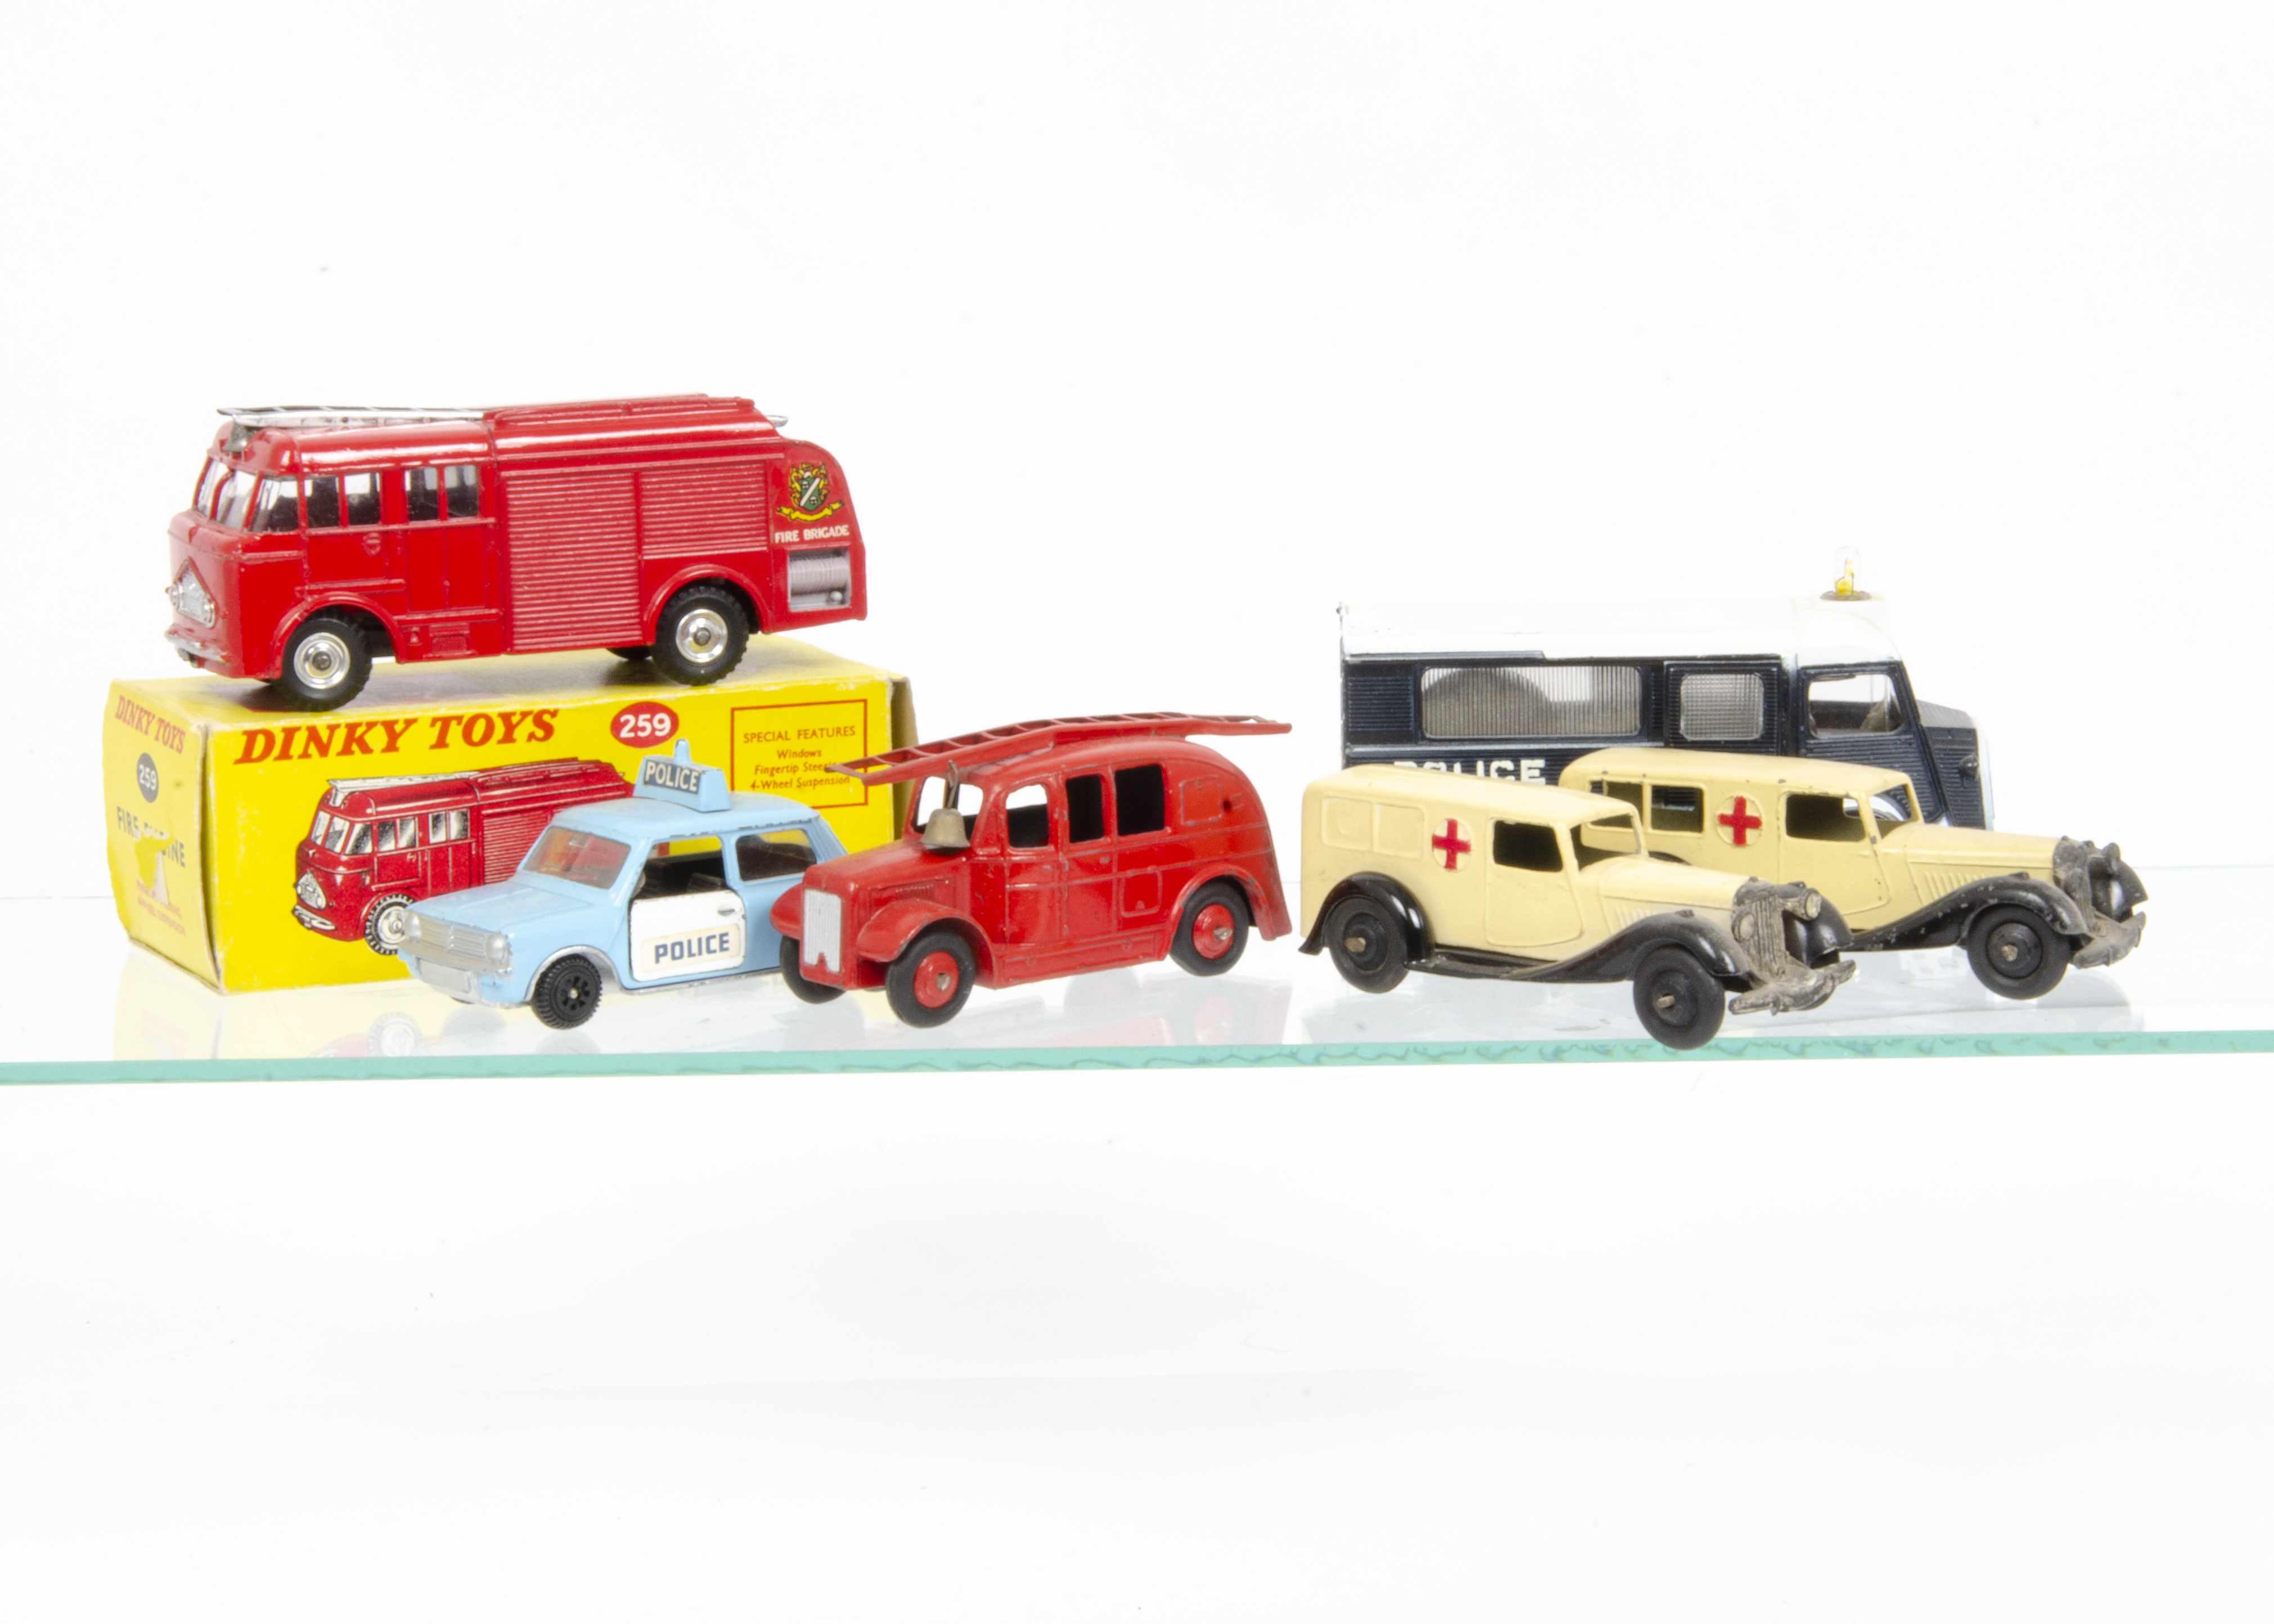 Dinky Toy Emergency Service Vehicles, 259 Fire Engine, in original box, loose 25h Streamlined Fire